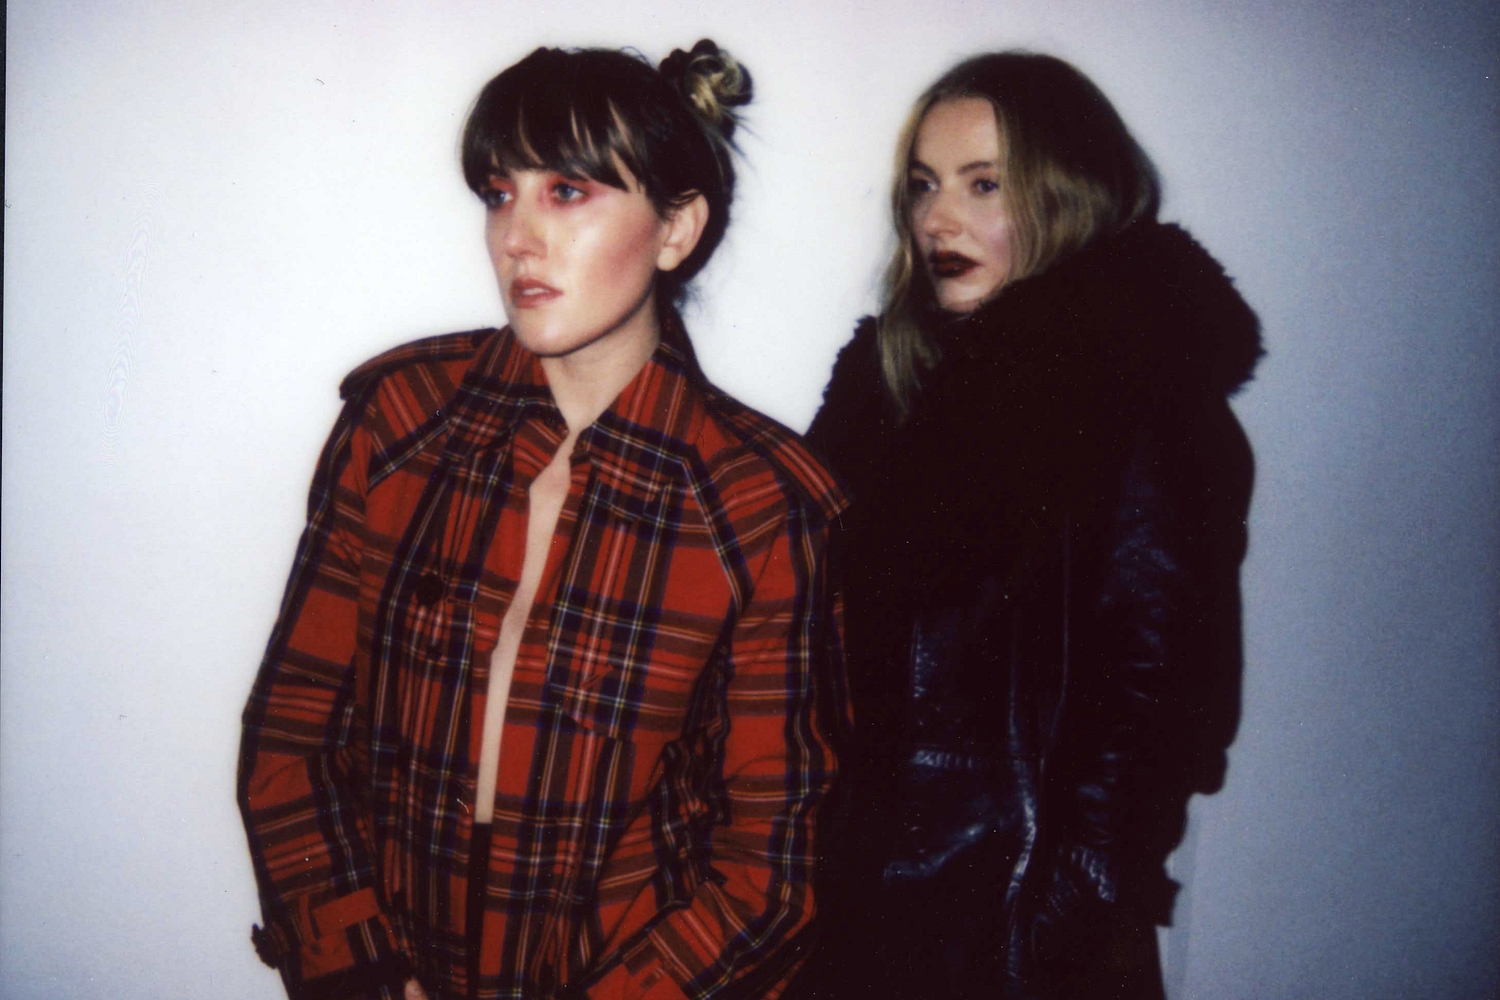 IDER reveal ‘Cross Yourself’ video